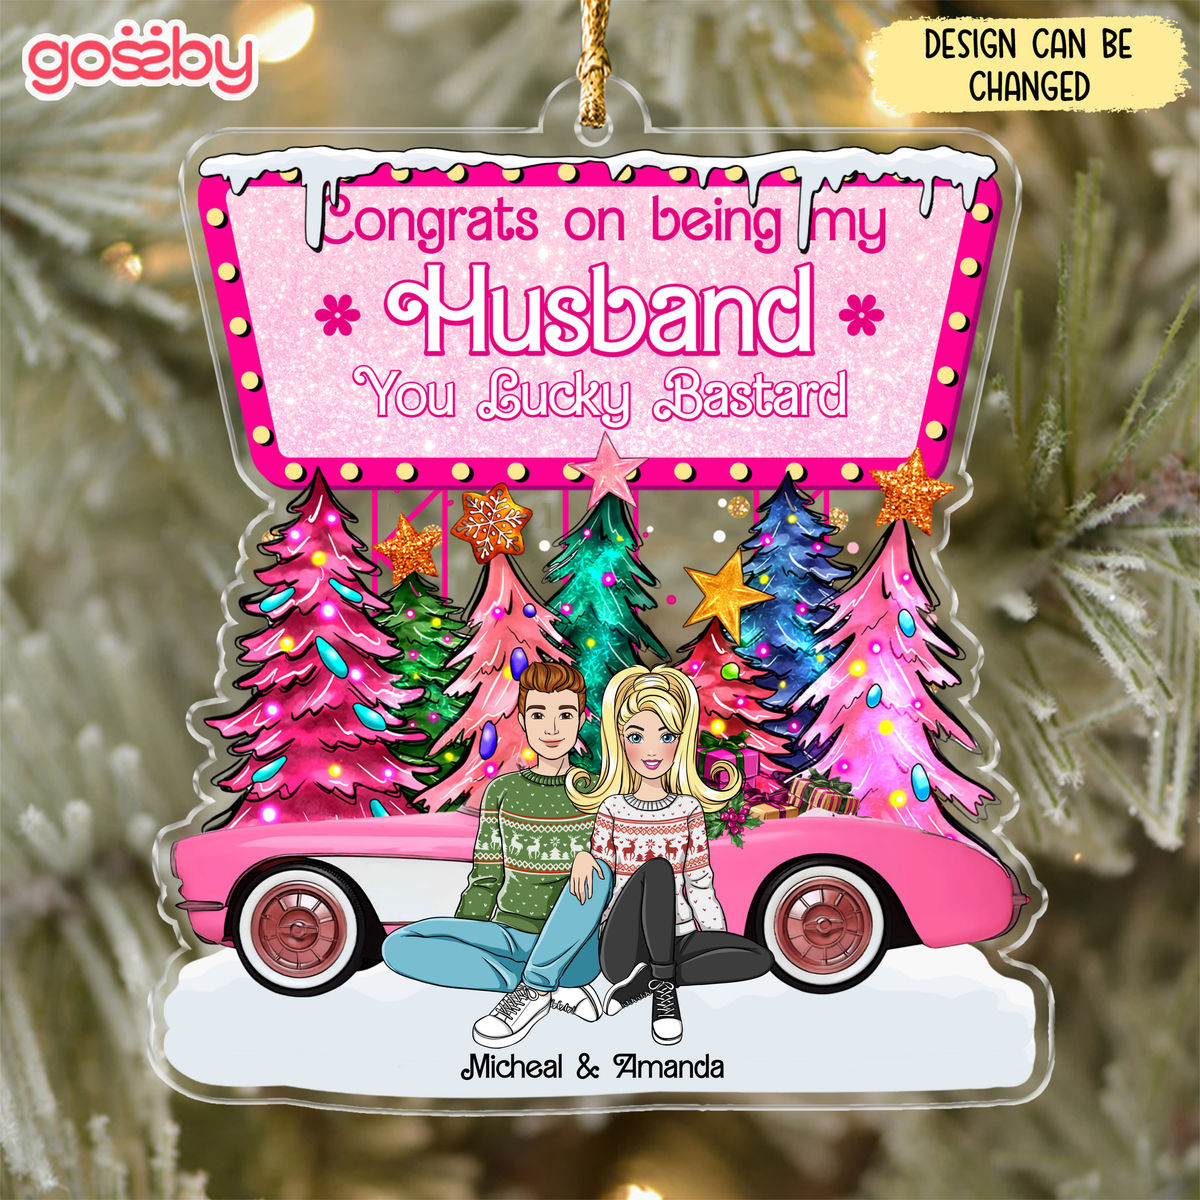 Personalized Acrylic Ornament - Couple Gifts - Congrats on being my husband you lucky bastard (38749)